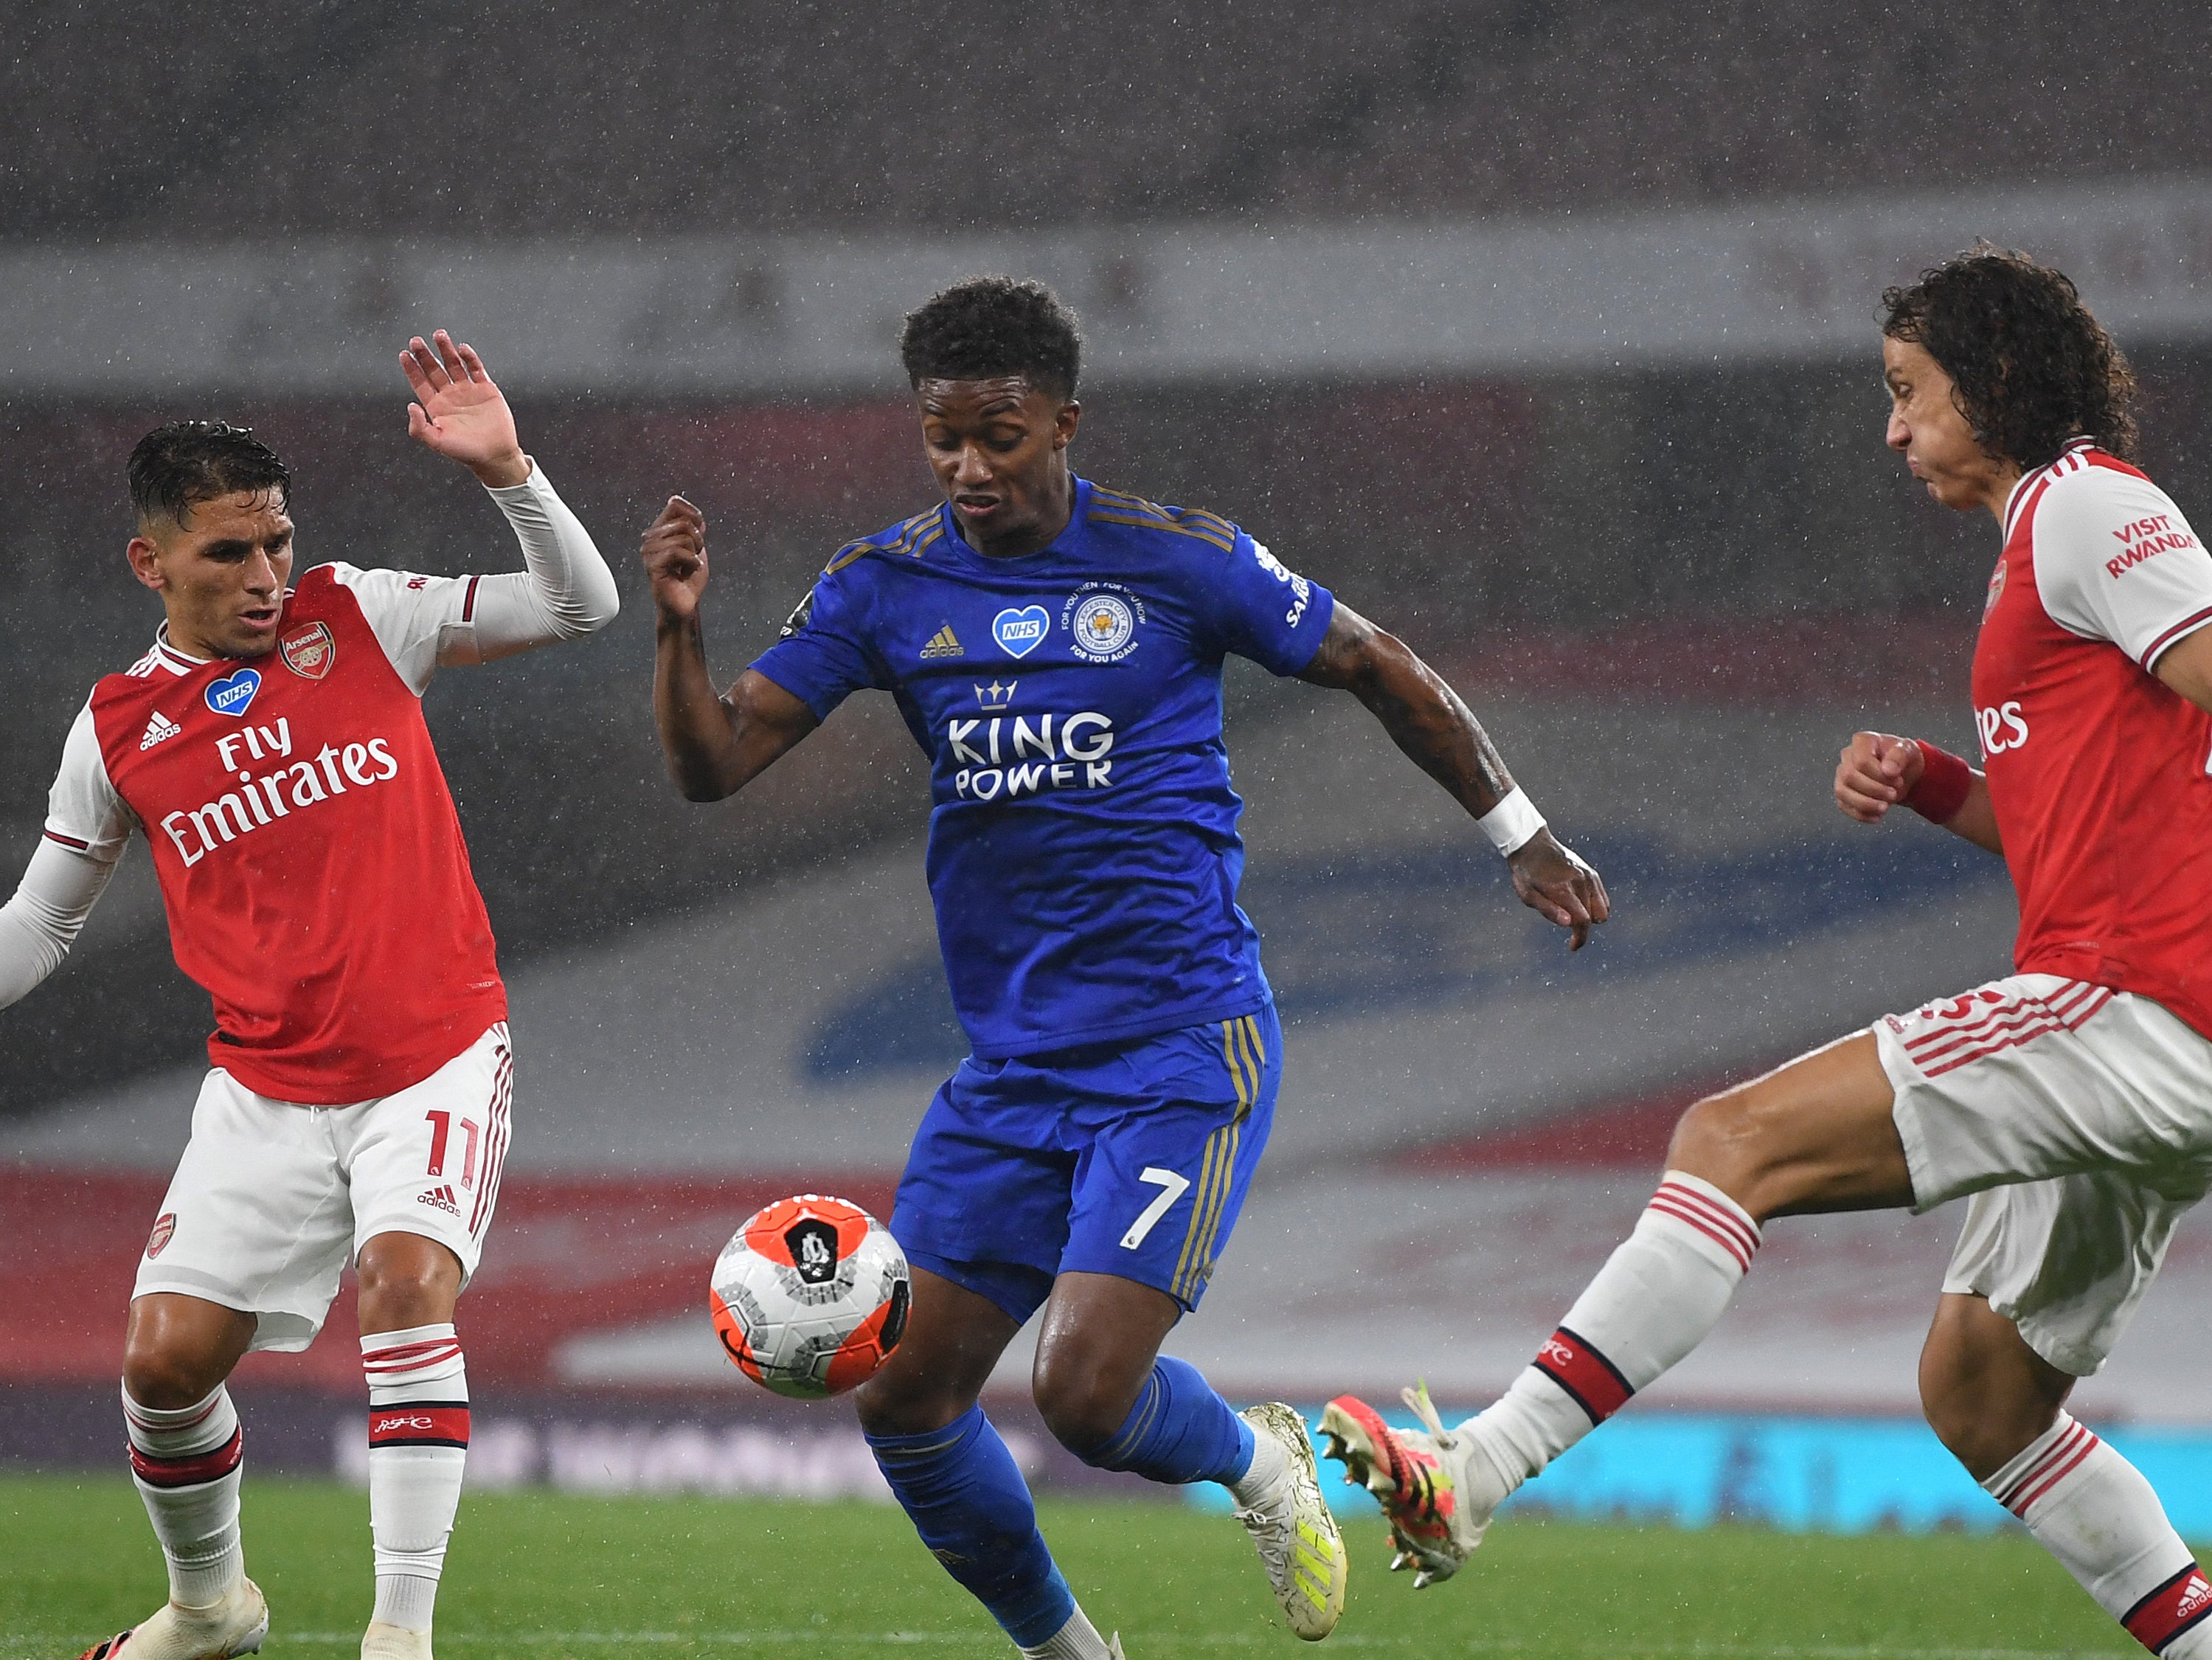 Arsenal take on Leicester in one of the biggest ties of the upcoming stages